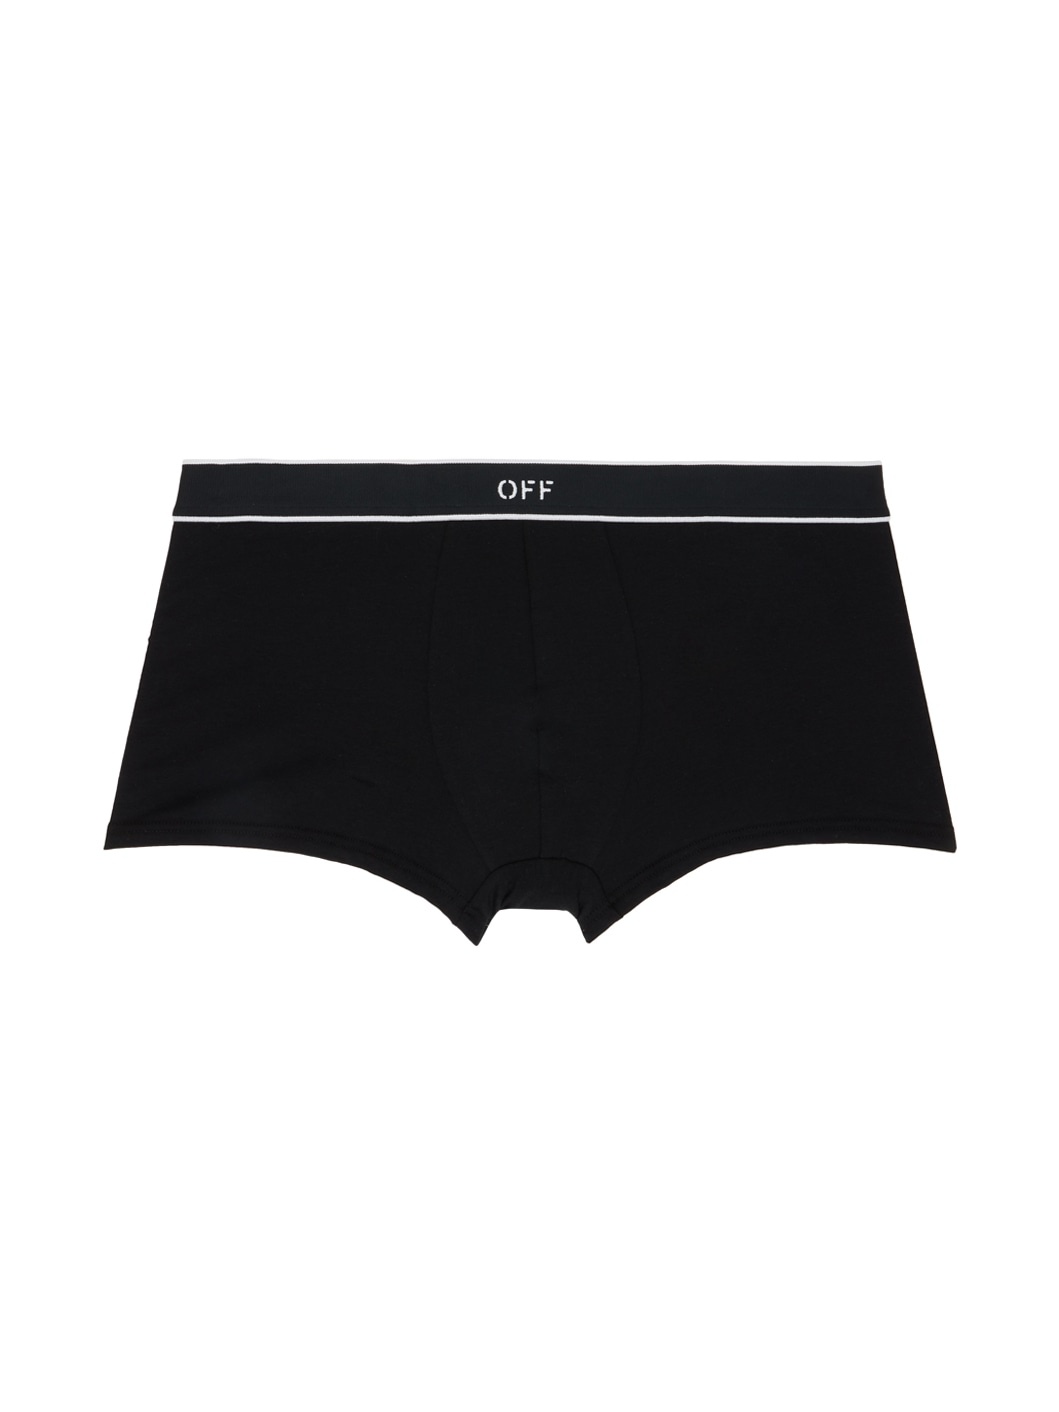 Two-Pack Black Off-Stamp Boxers - 2